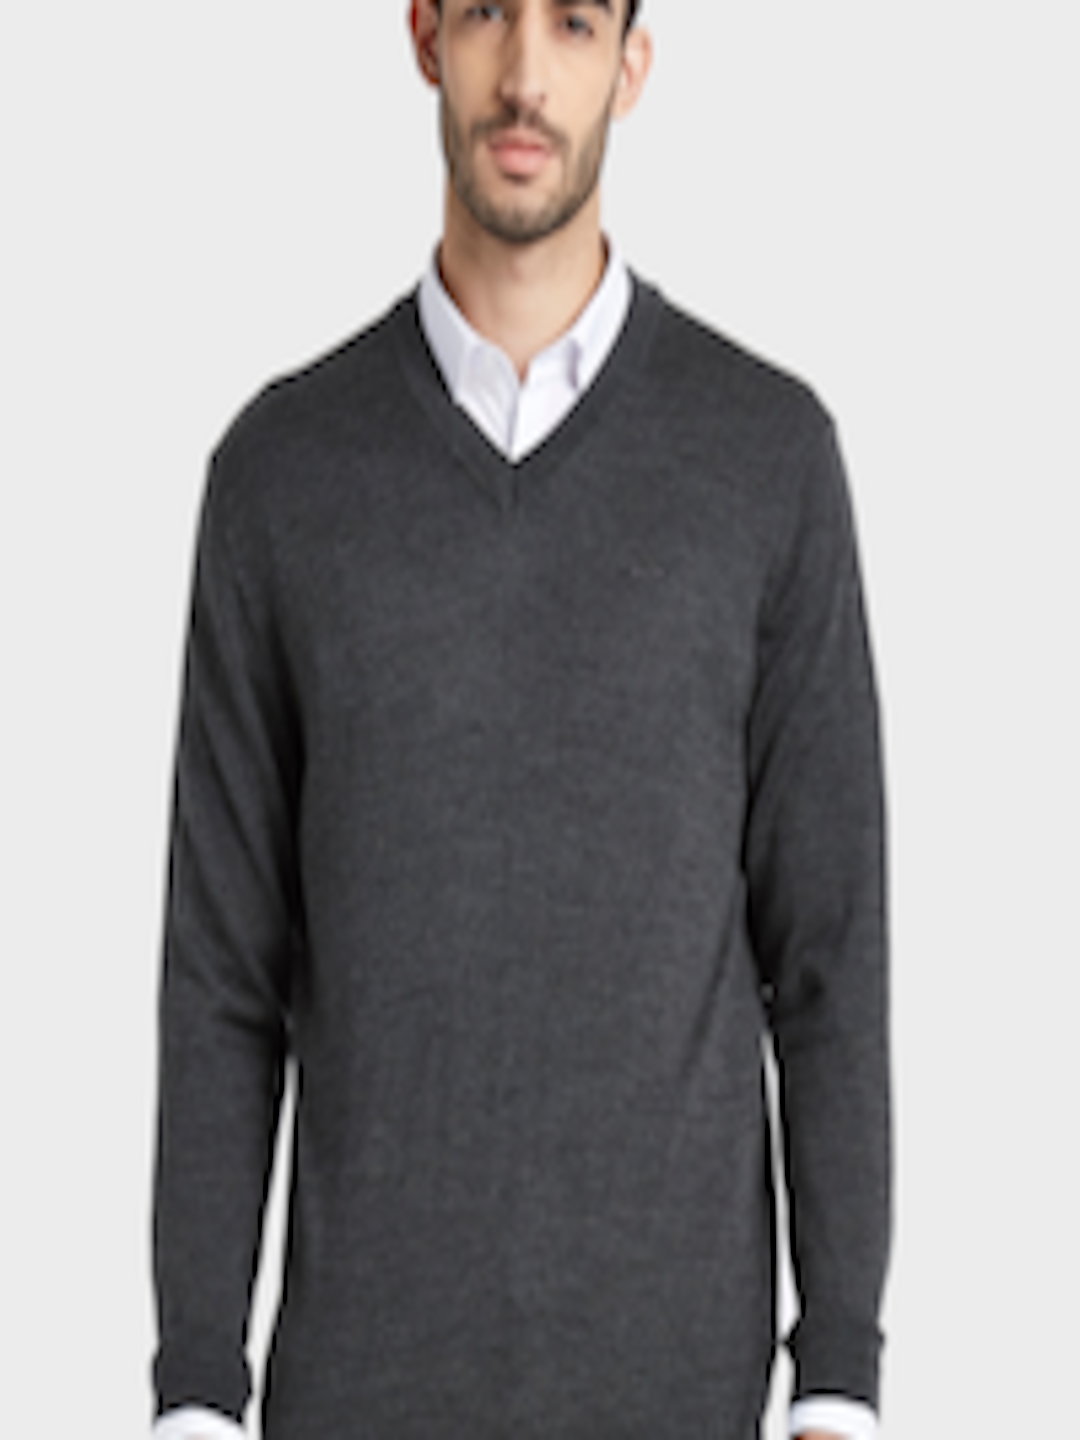 Buy ColorPlus Men Charcoal Grey Solid Sweater - Sweaters for Men ...